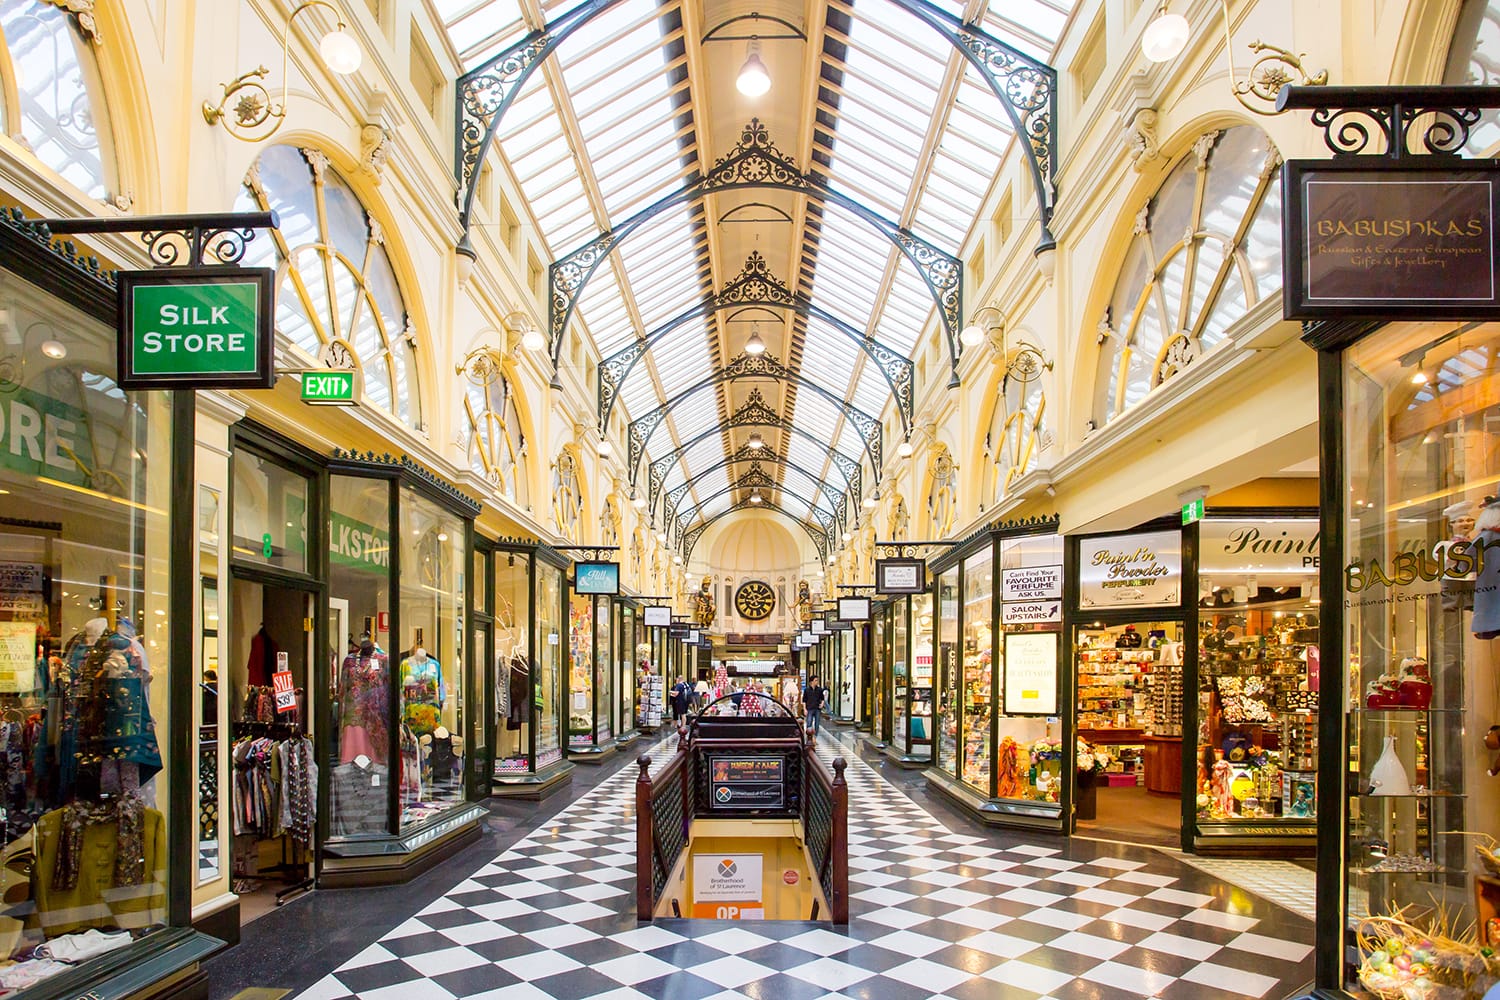 Melbourne's famous Royal Arcade shopping centre during the day with shoppers.